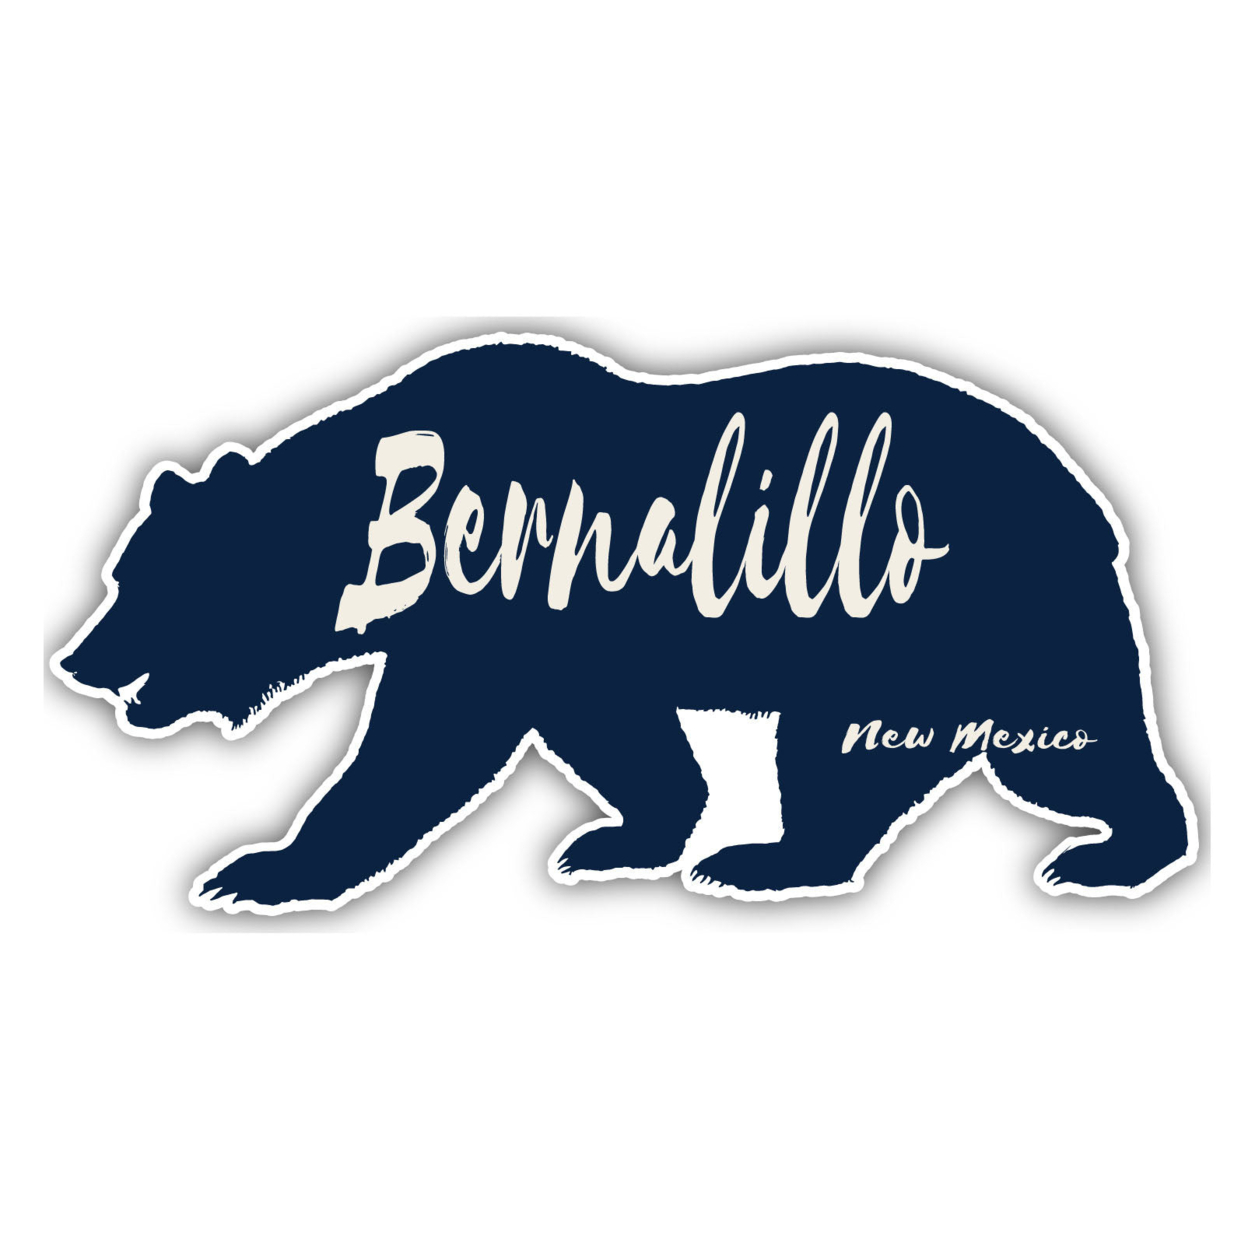 Bernalillo New Mexico Souvenir Decorative Stickers (Choose Theme And Size) - 4-Pack, 6-Inch, Bear